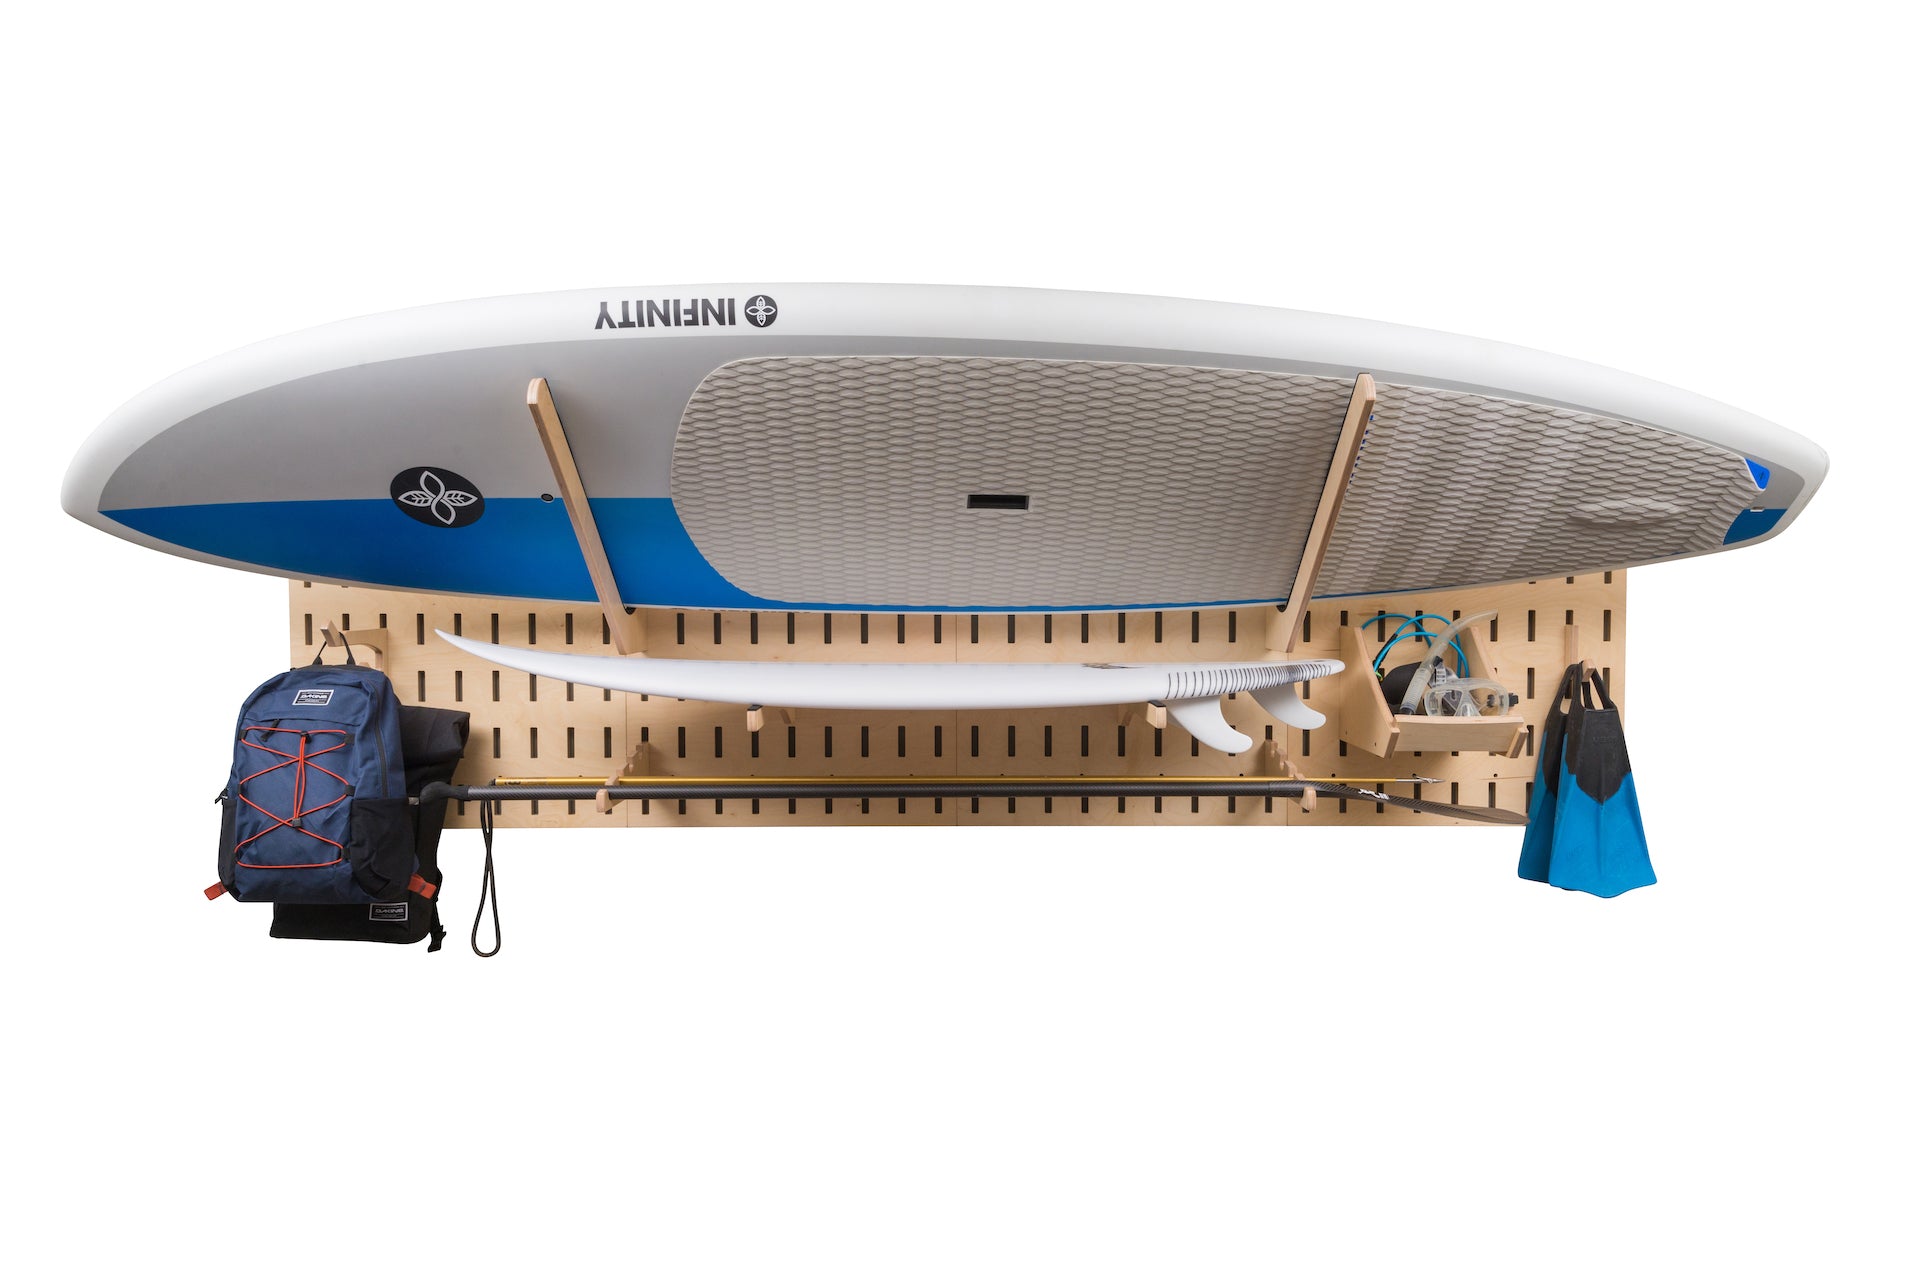 paddle-board rack for home organization or retail store fixture